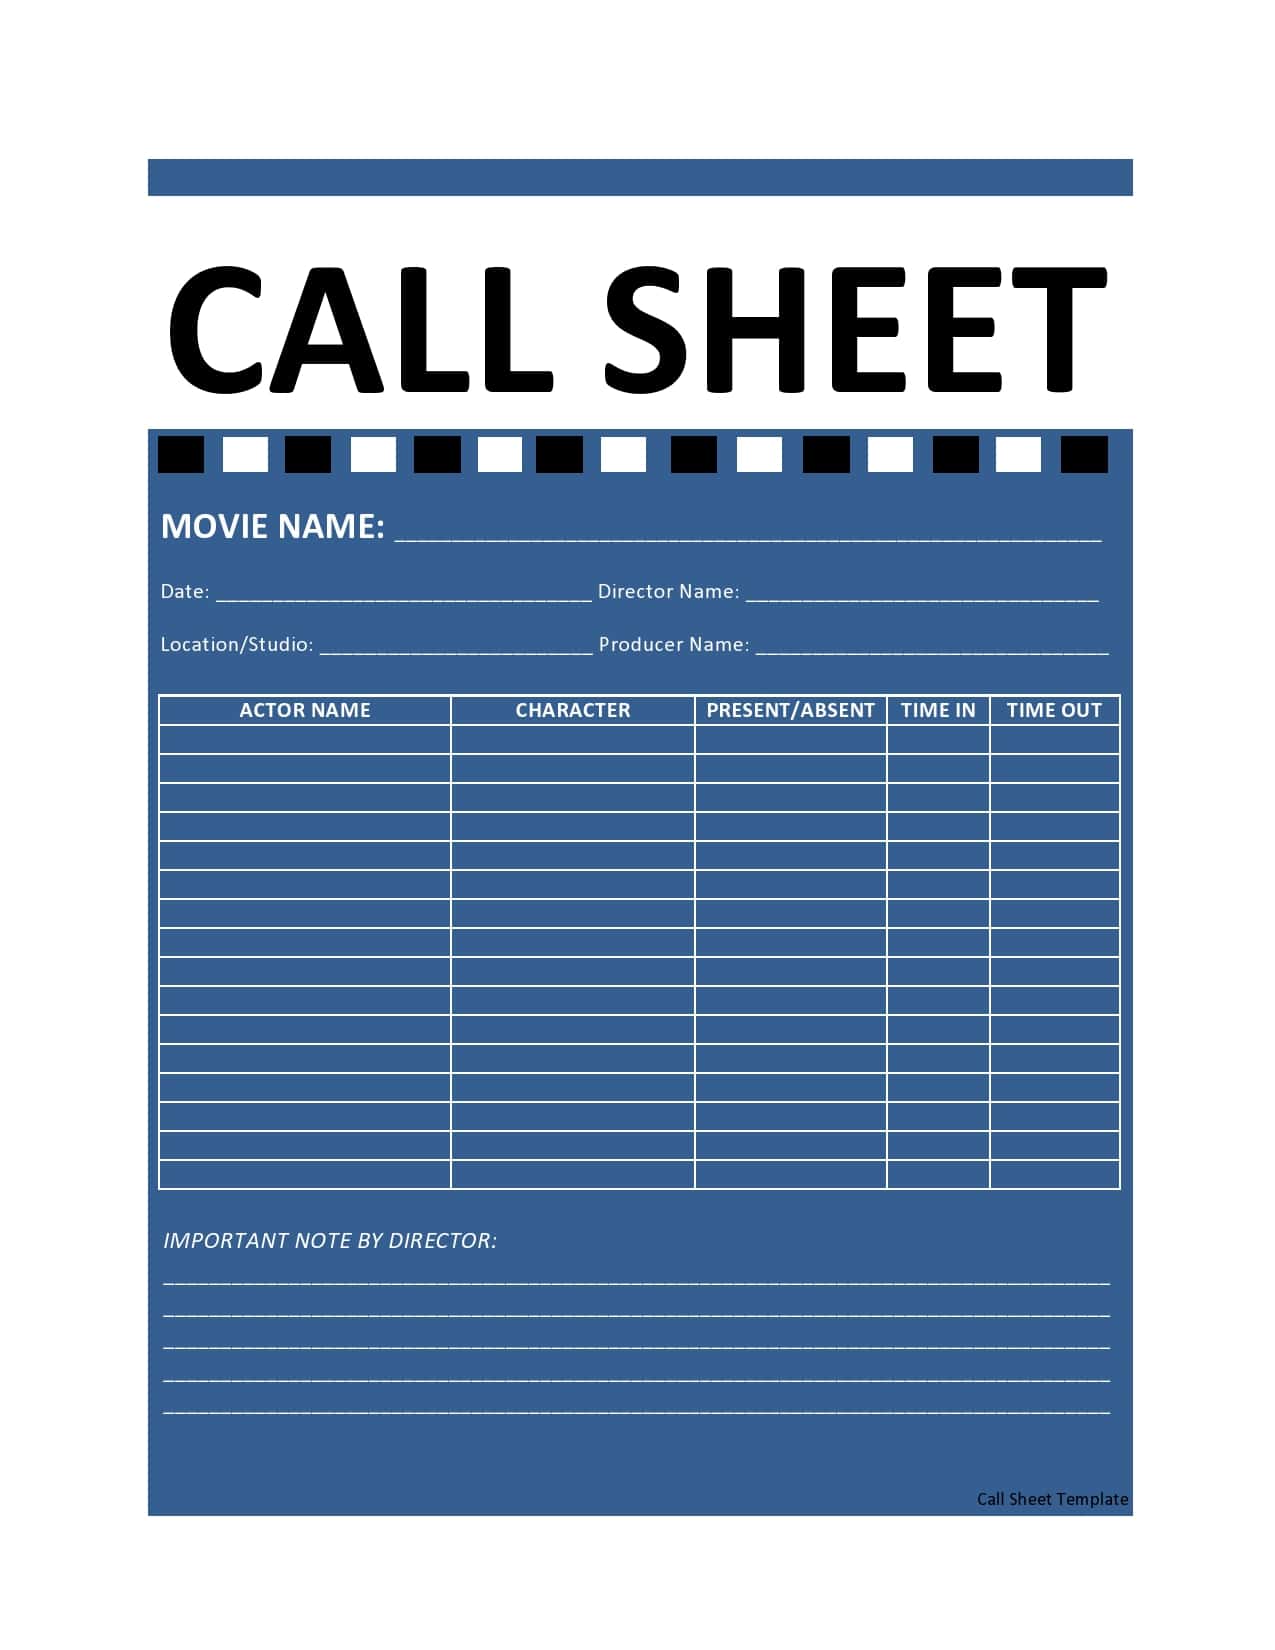 20 Simple Call Sheet Templates (FREE) - TemplateArchive For Film Call Sheet Template Word